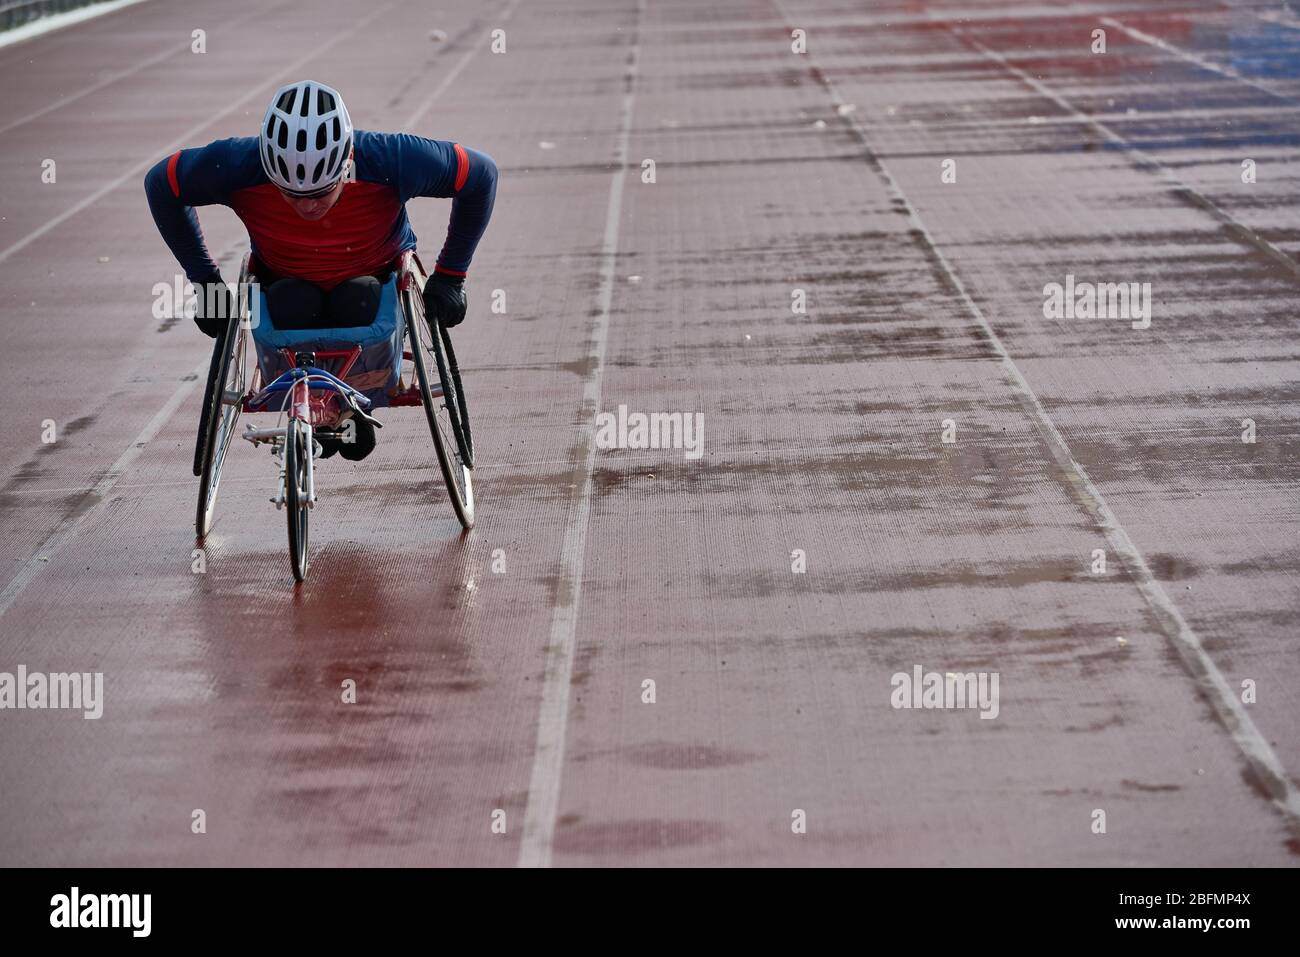 Wheelchair athletics. Strong-willed physically impaired male athlete training speed in racing chair at outdoor track and field stadium Stock Photo